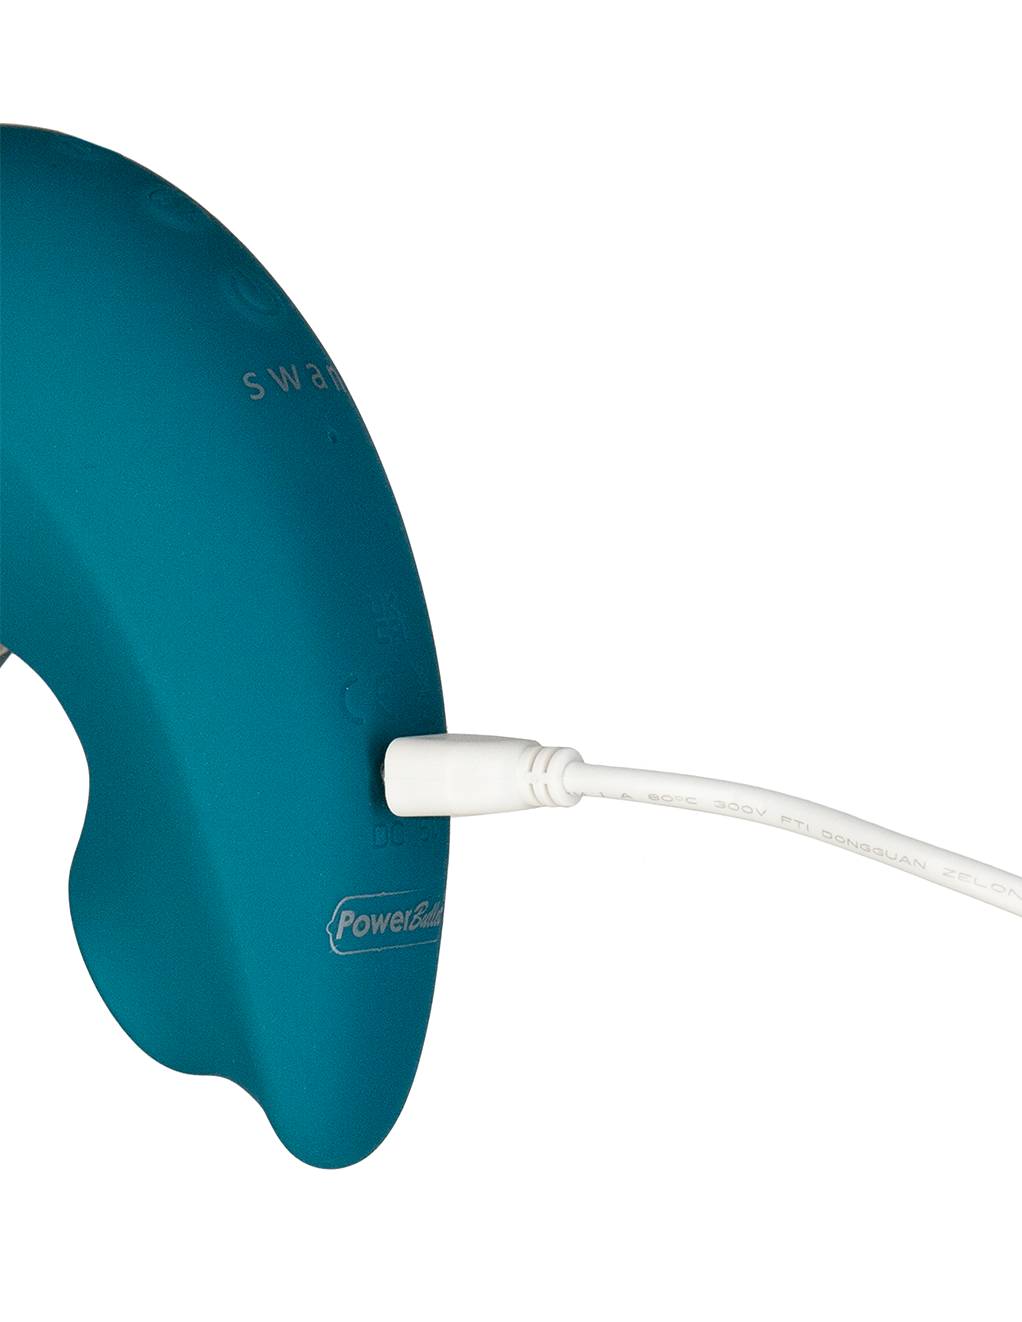 The Monarch Swan - Teal - With Charger